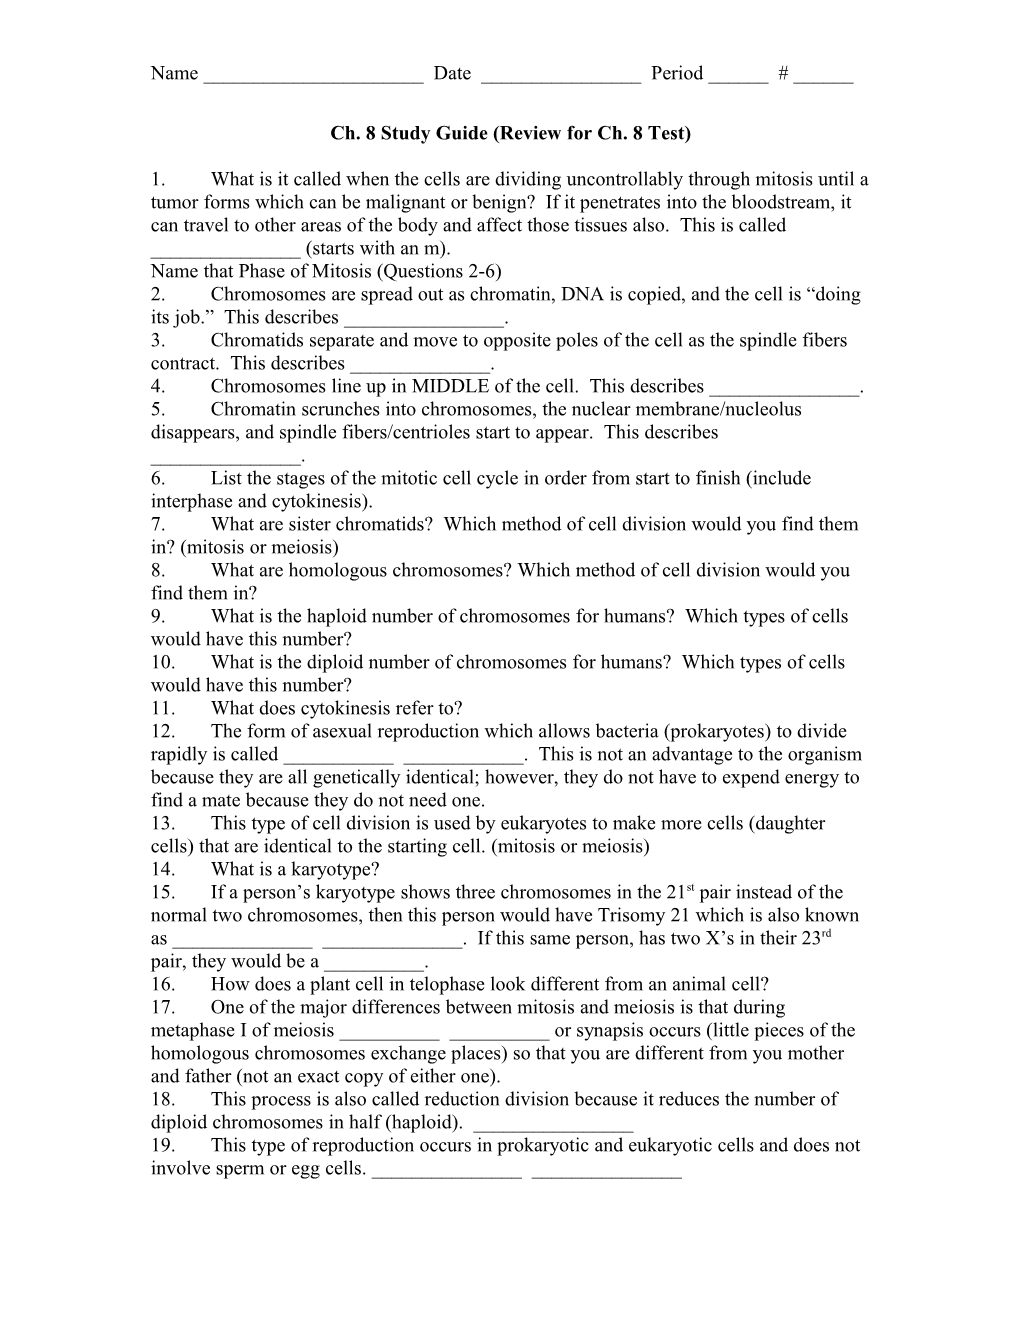 Ch. 8 Study Guide (Review for Ch. 8 Test)